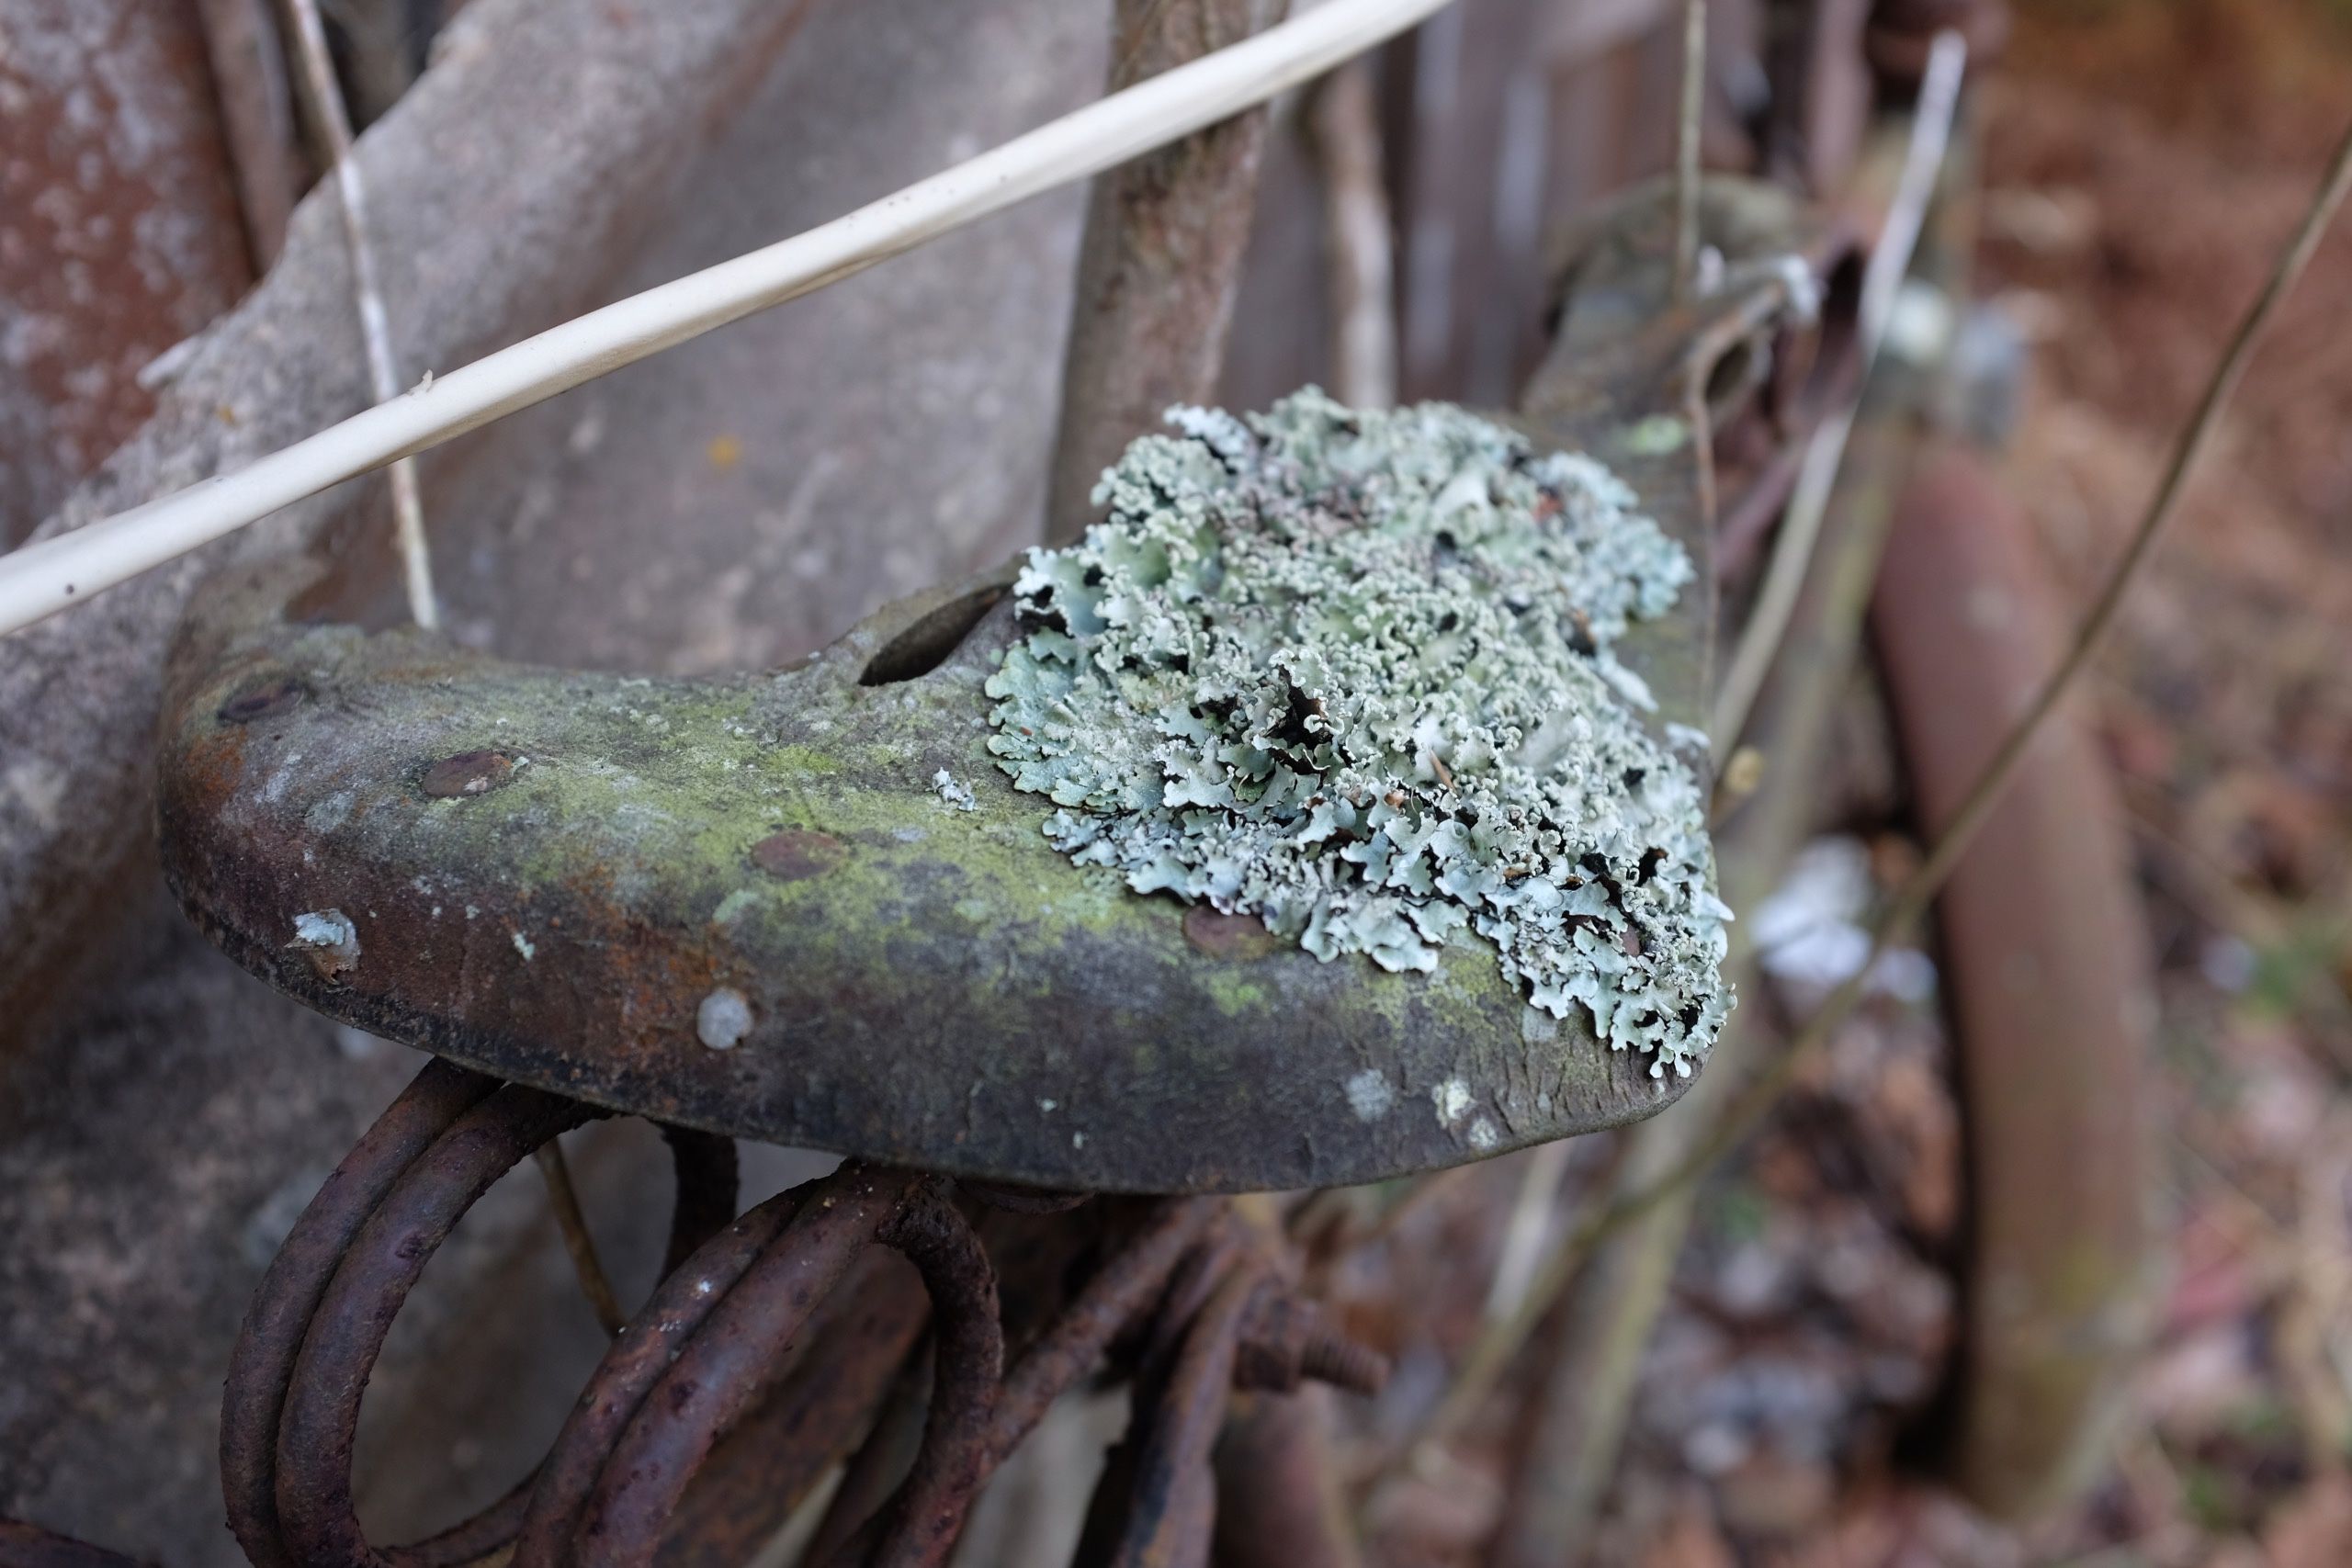 A bicycle seat overgrown with leafy lichen.